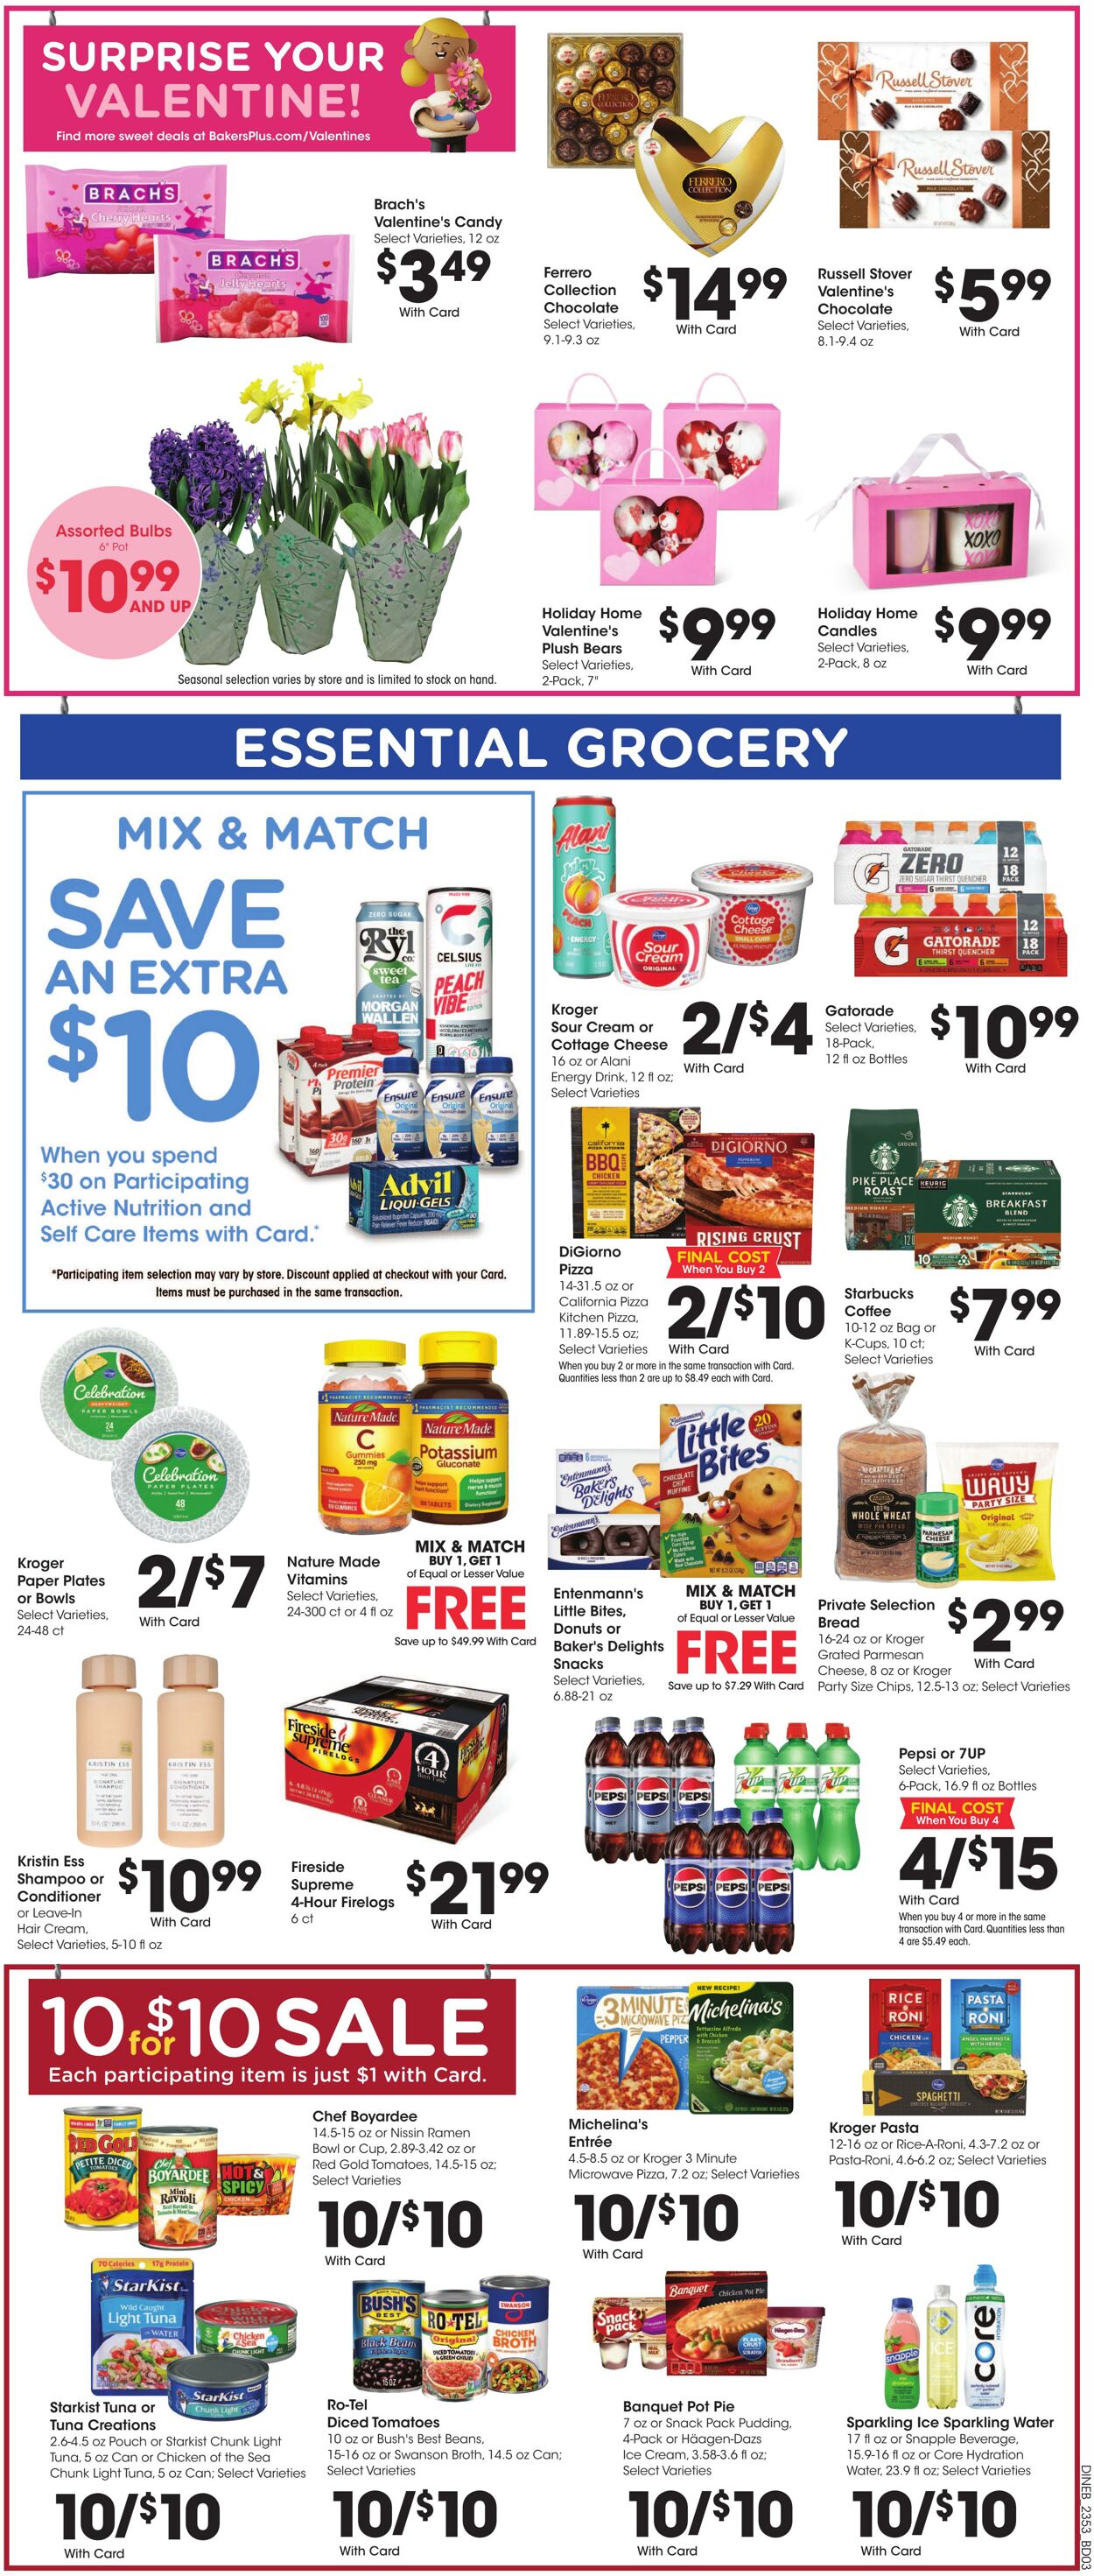 Weekly ad Baker's 01/31/2024 - 02/06/2024